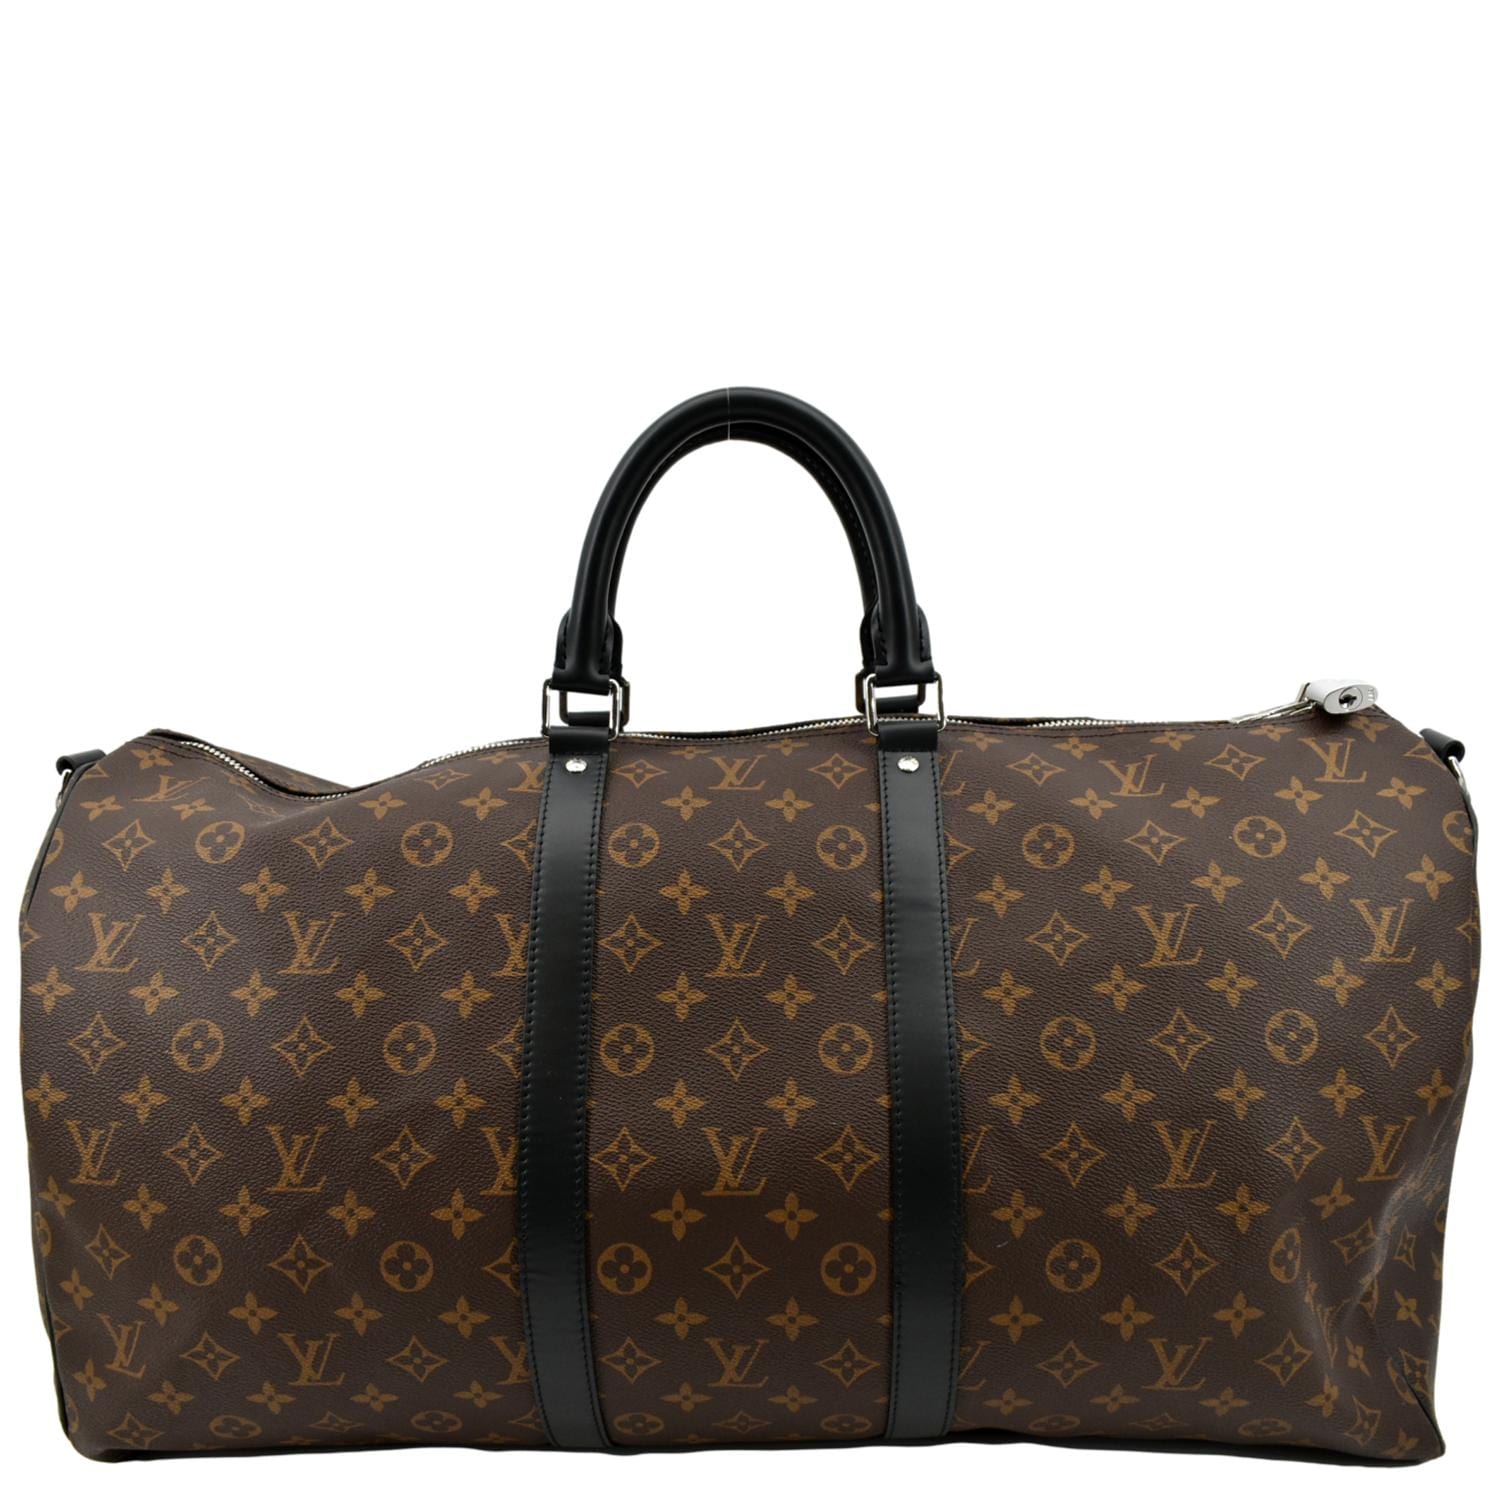 Keep - Bag - Vuitton - Louis - Monogram - Louis Vuitton special edition  pre-owned Mountsouris GM backpack - ep_vintage luxury Store - 55 - Boston -  M41424 – dct - All